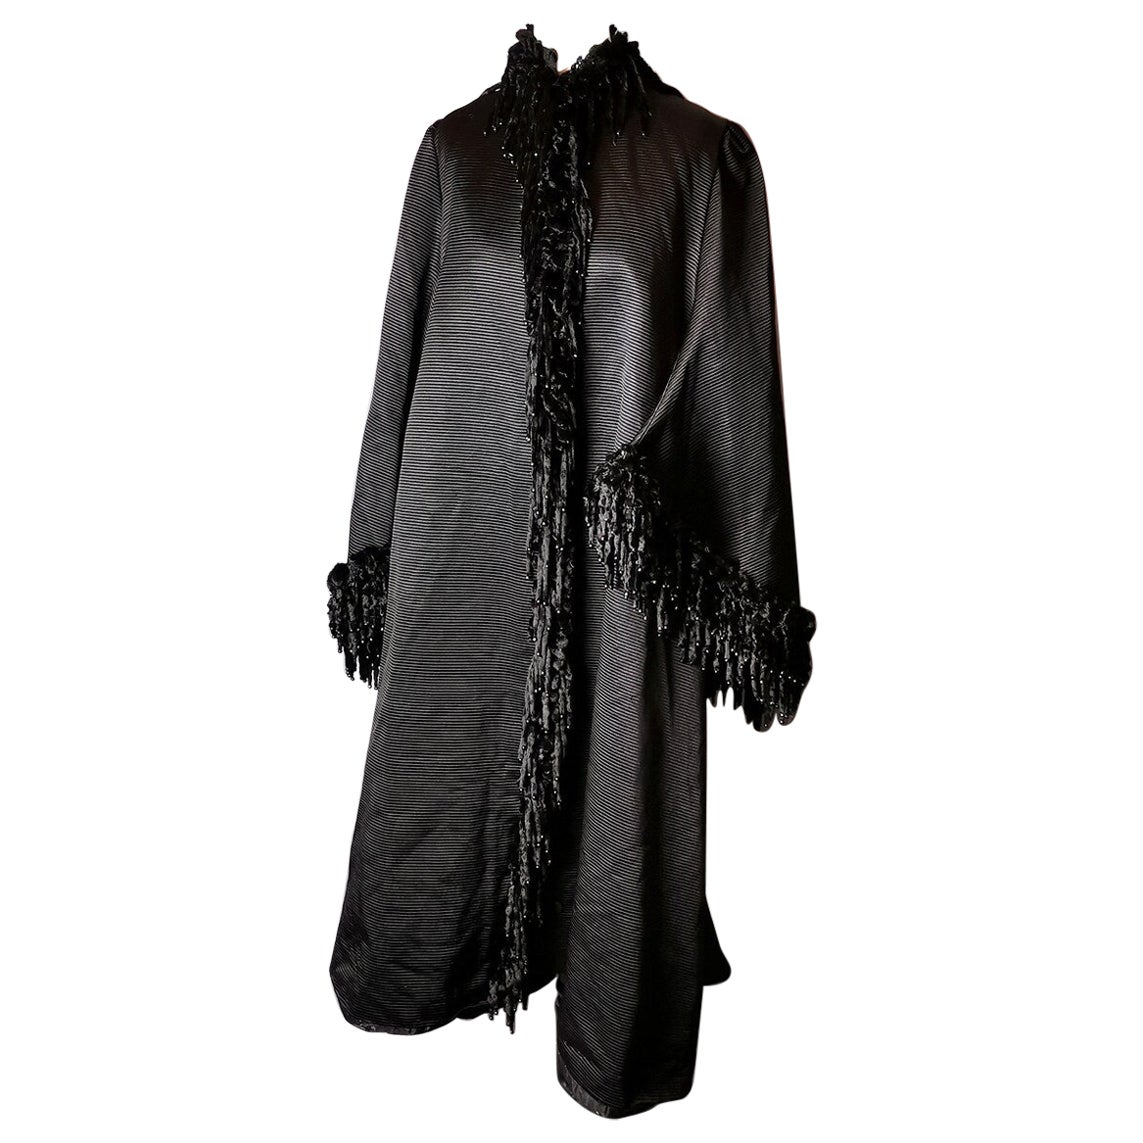 Antique Victorian mourning coat, dolman sleeve 